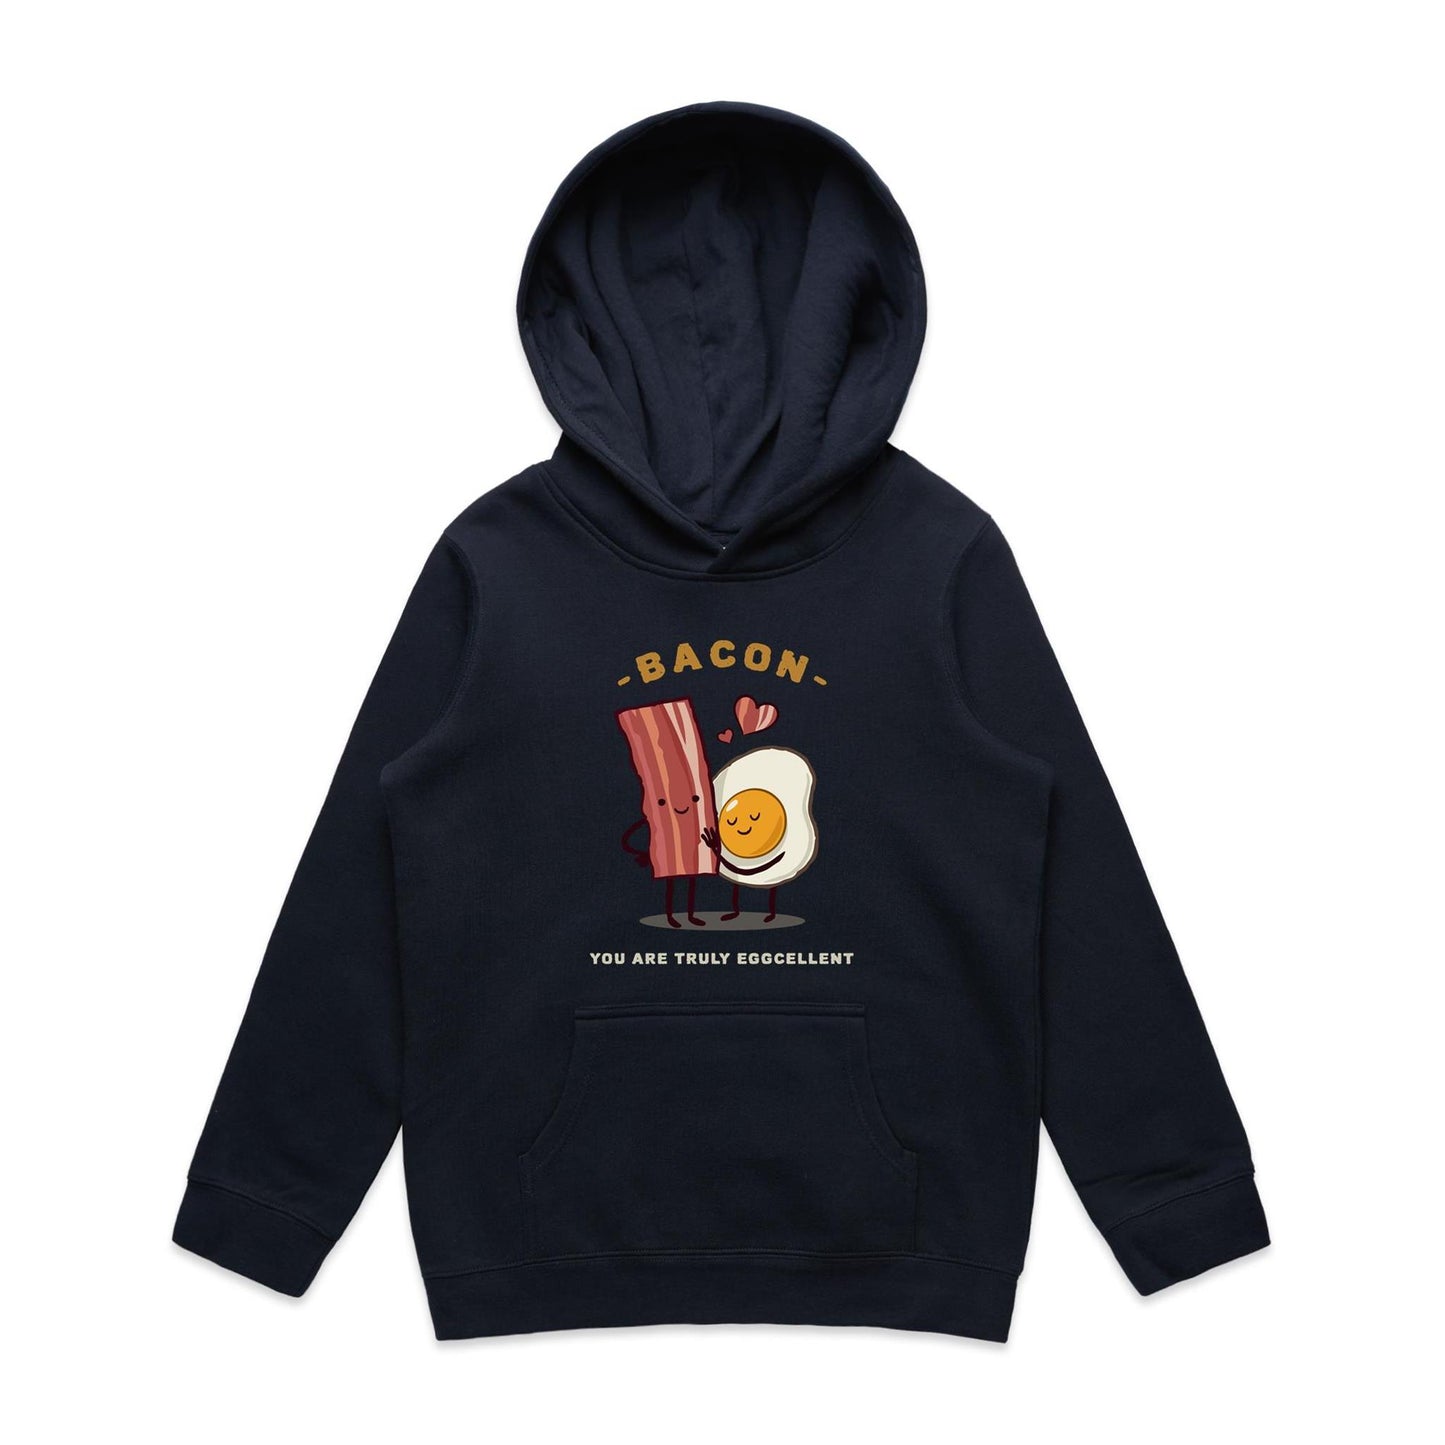 Bacon, You Are Truly Eggcellent - Youth Supply Hood Navy Kids Hoodie Food